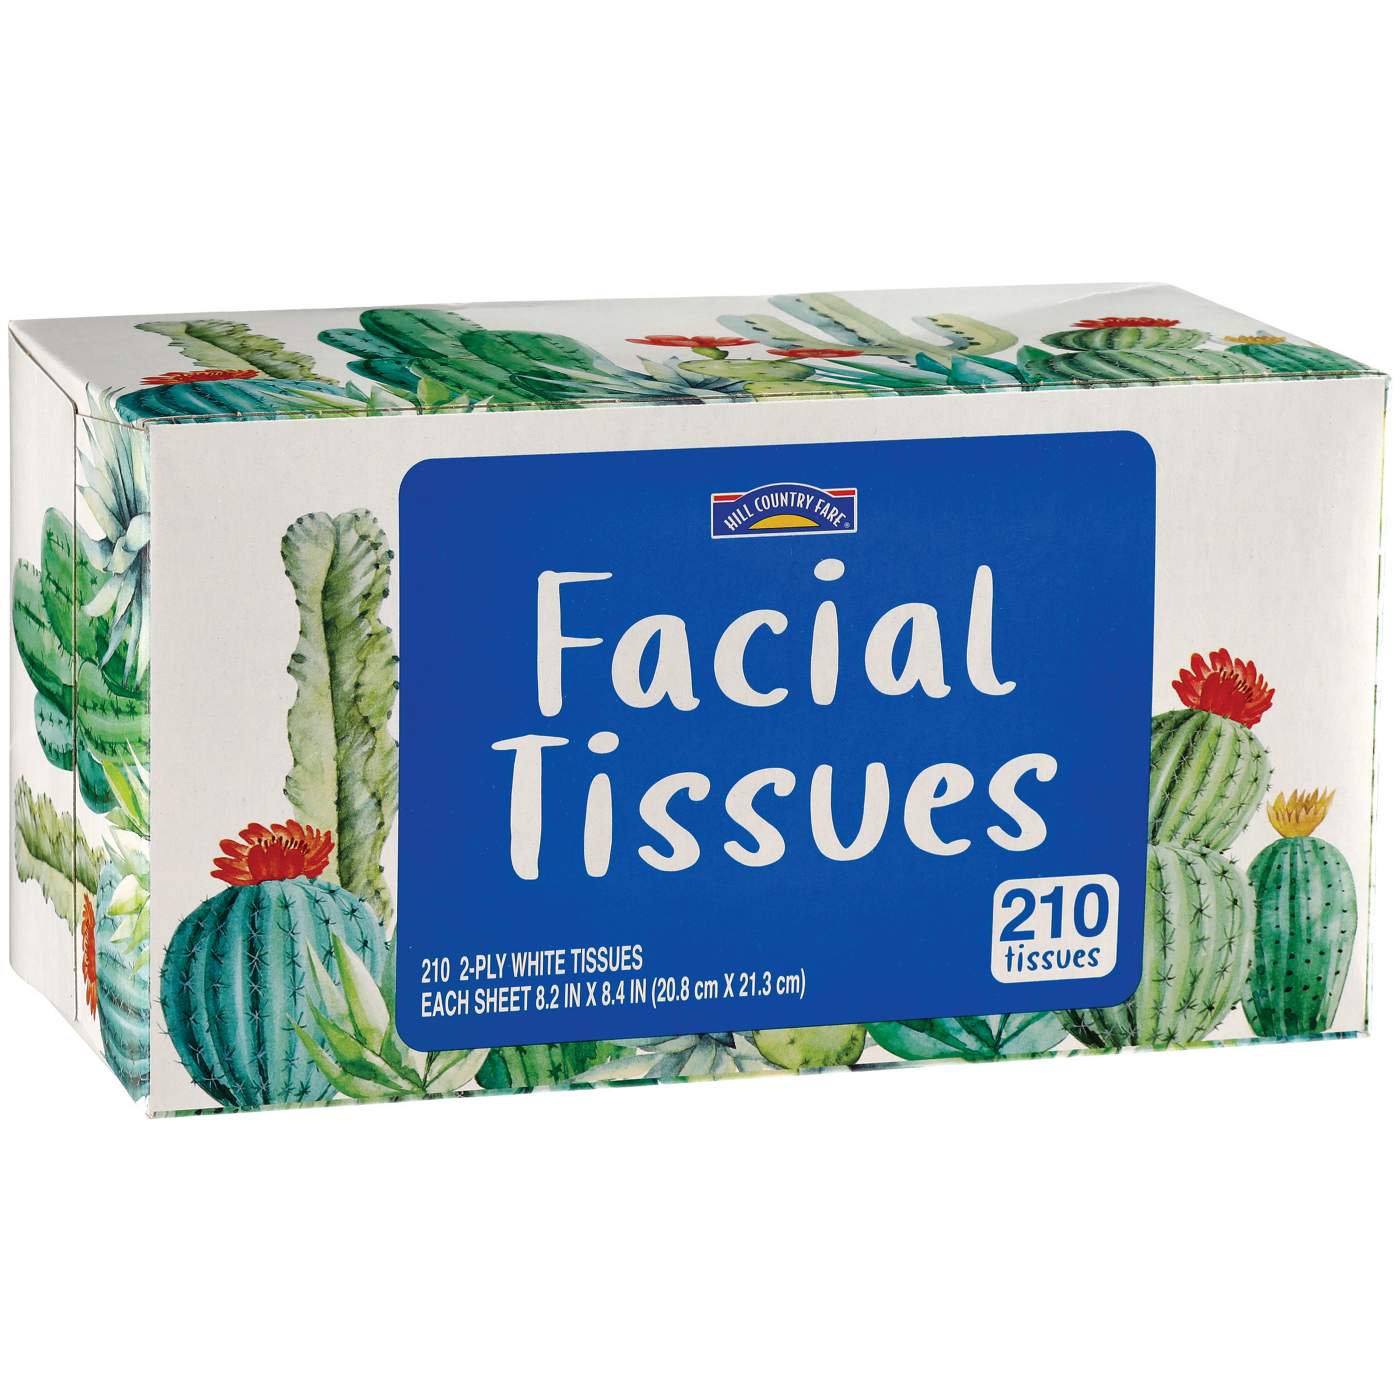 Hill Country Fare Facial Tissues; image 1 of 4